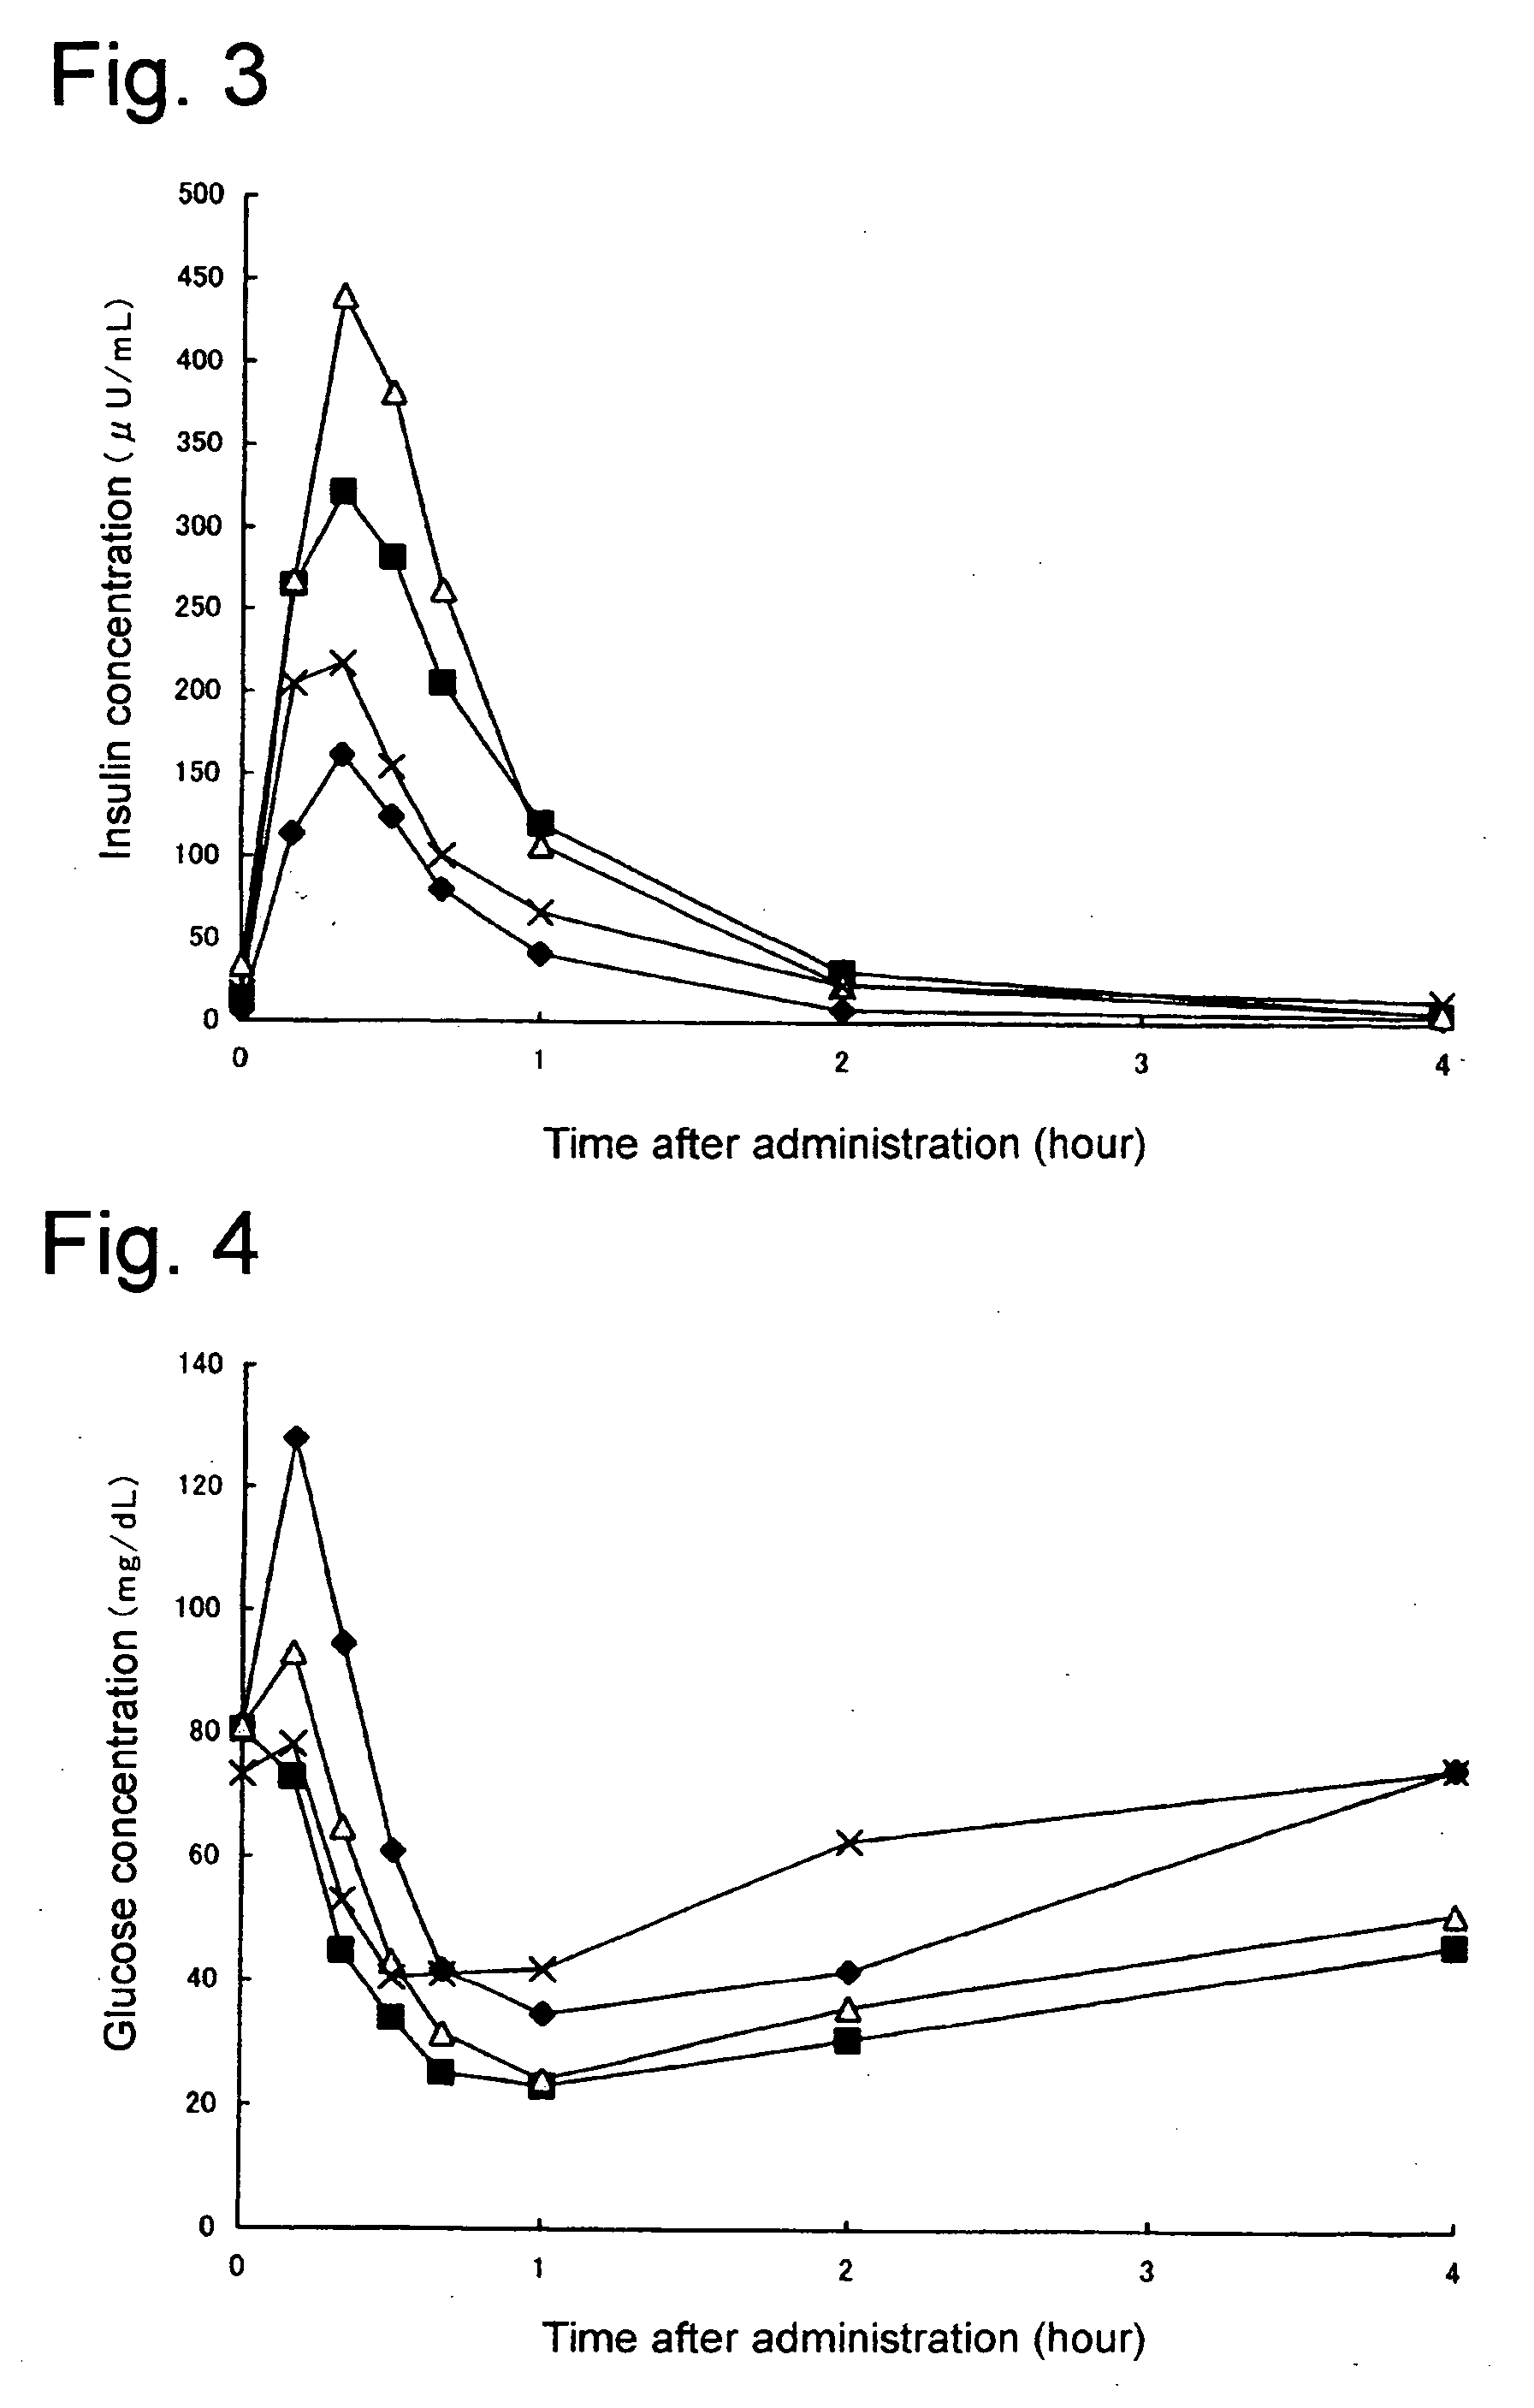 Composition of insulin for nasal administration